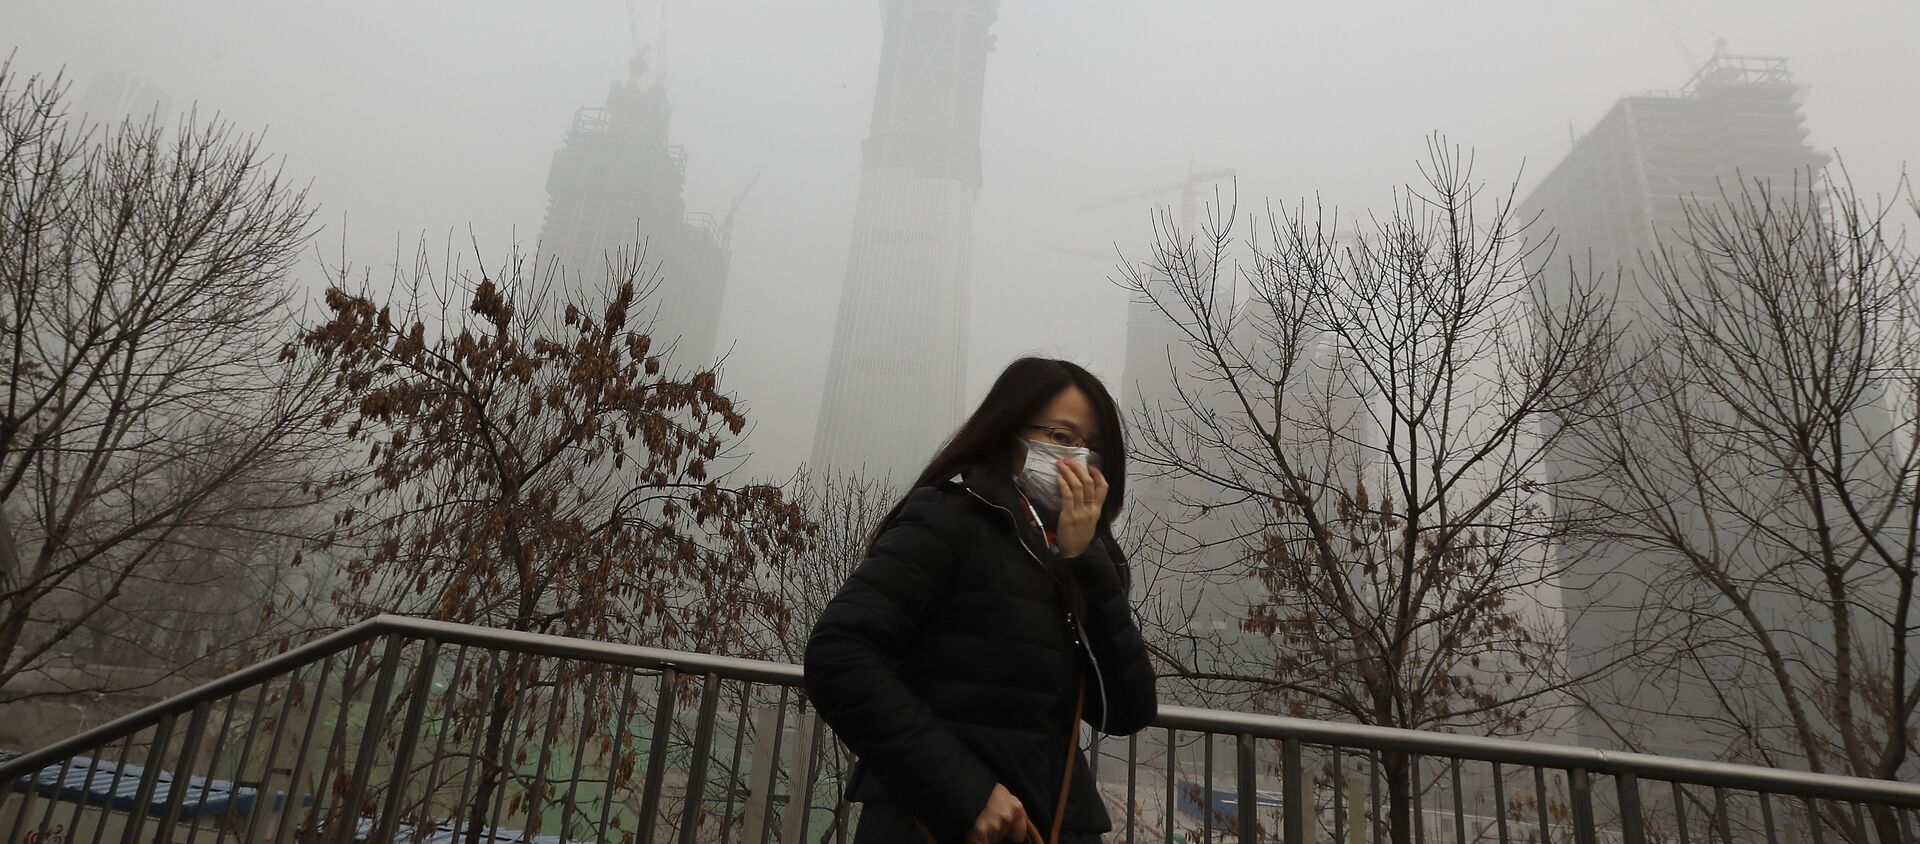 A woman wearing a mask for protection against air pollution walks on a pedestrian overhead bridge in Beijing as the capital of China is shrouded by heavy smog on Tuesday, Dec. 20, 2016 - Sputnik International, 1920, 12.03.2019